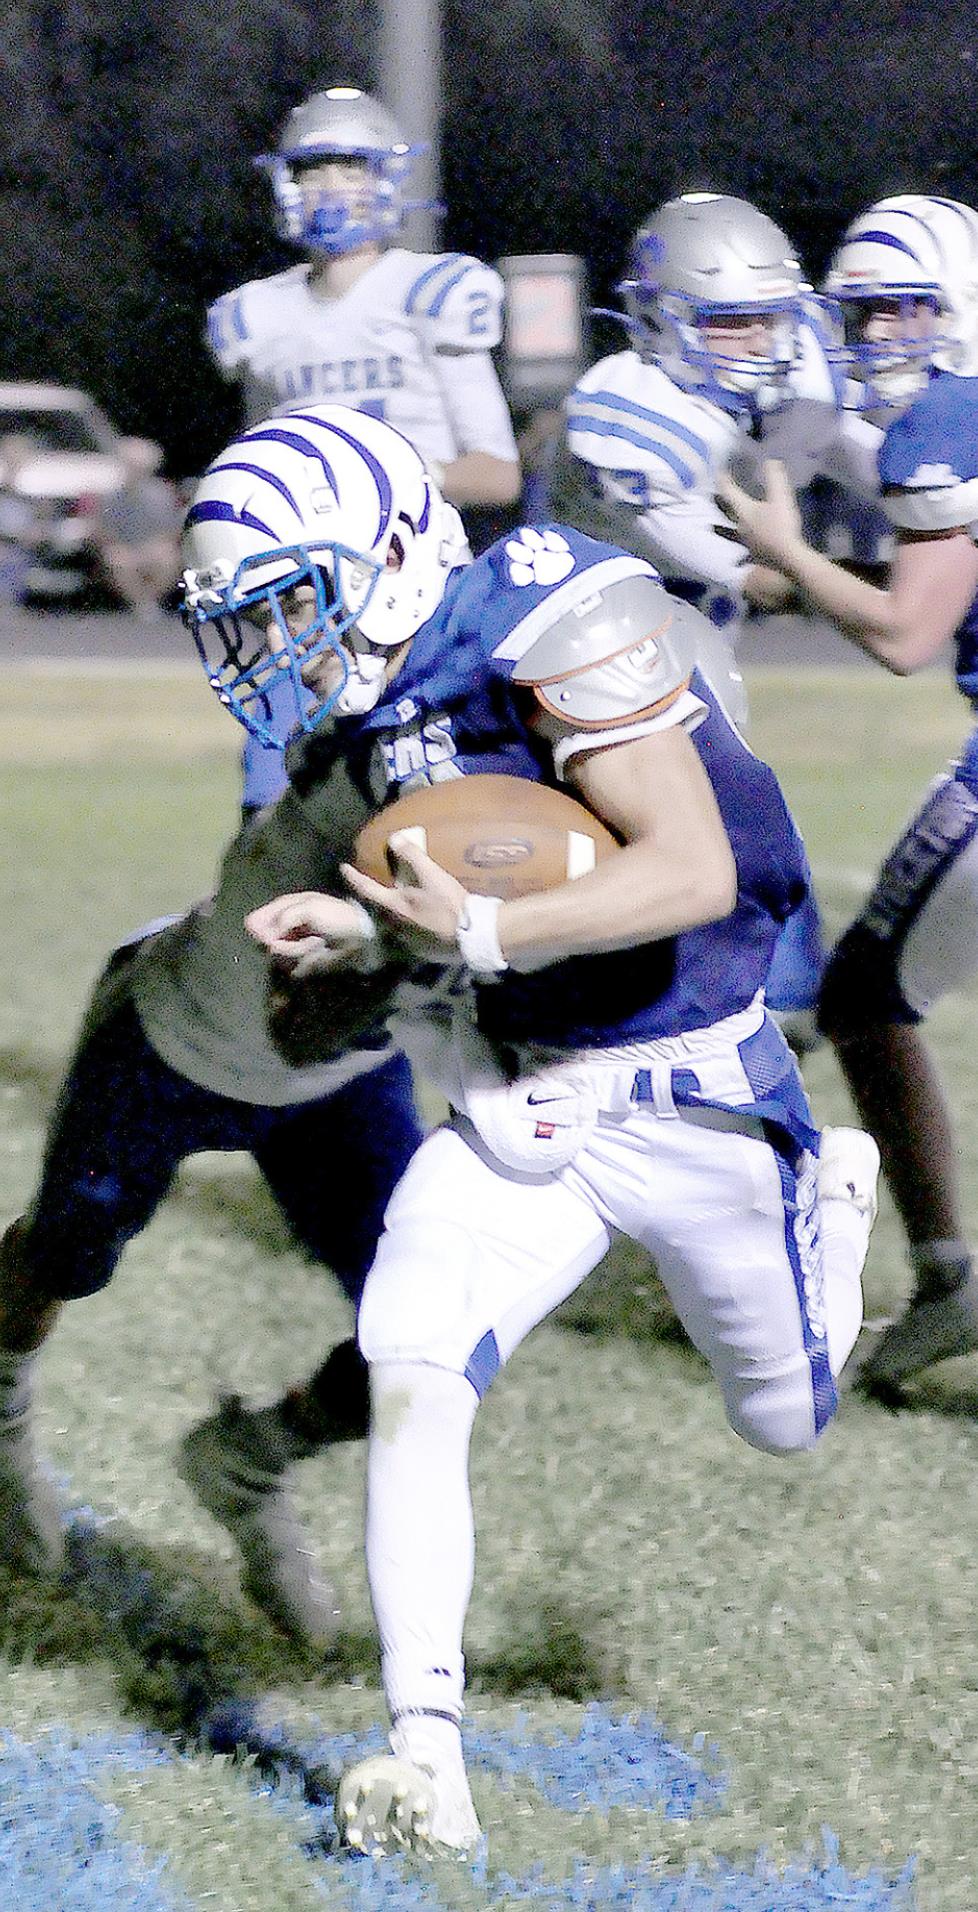 LEIGHTON COLBURN carries the ball across the goal line for a Tiger touchdown in their game against Spearville last Friday.